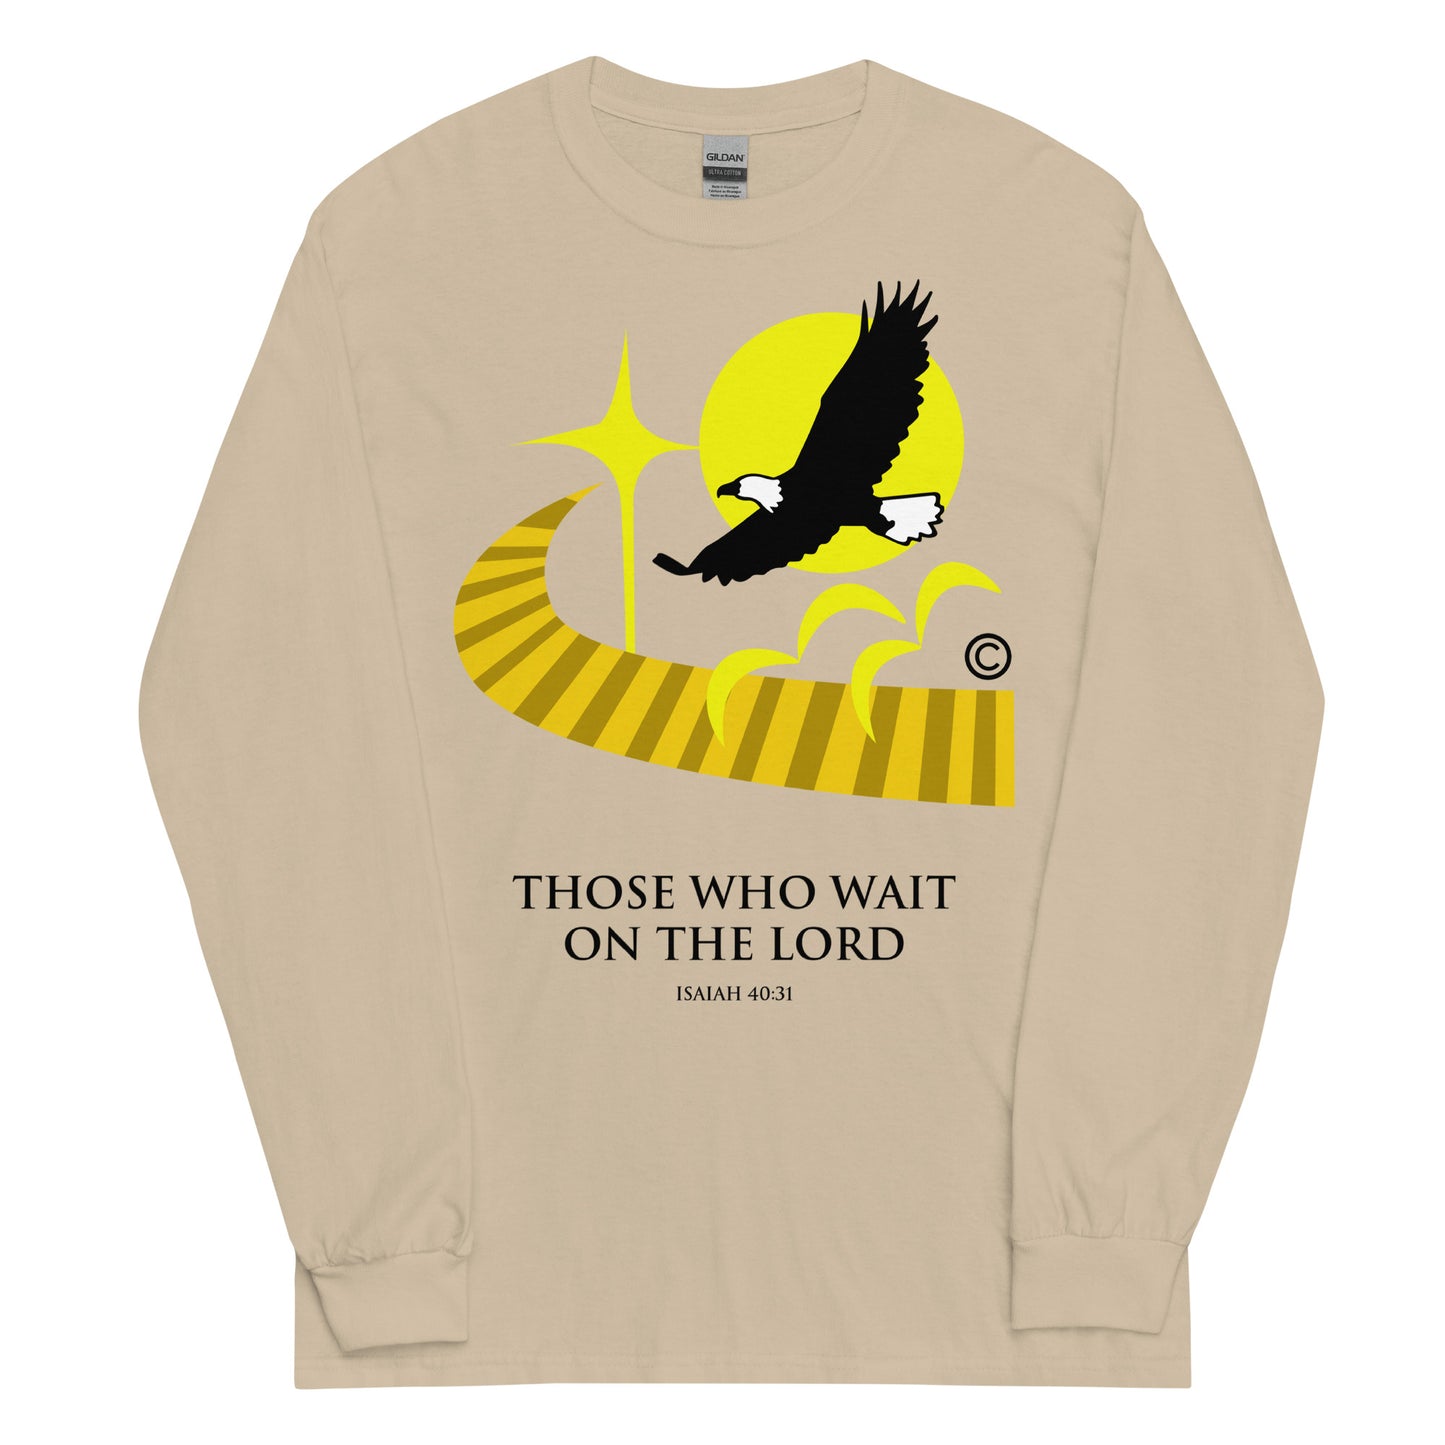 Those Who Wait on the Lord Men’s Long Sleeve Shirt